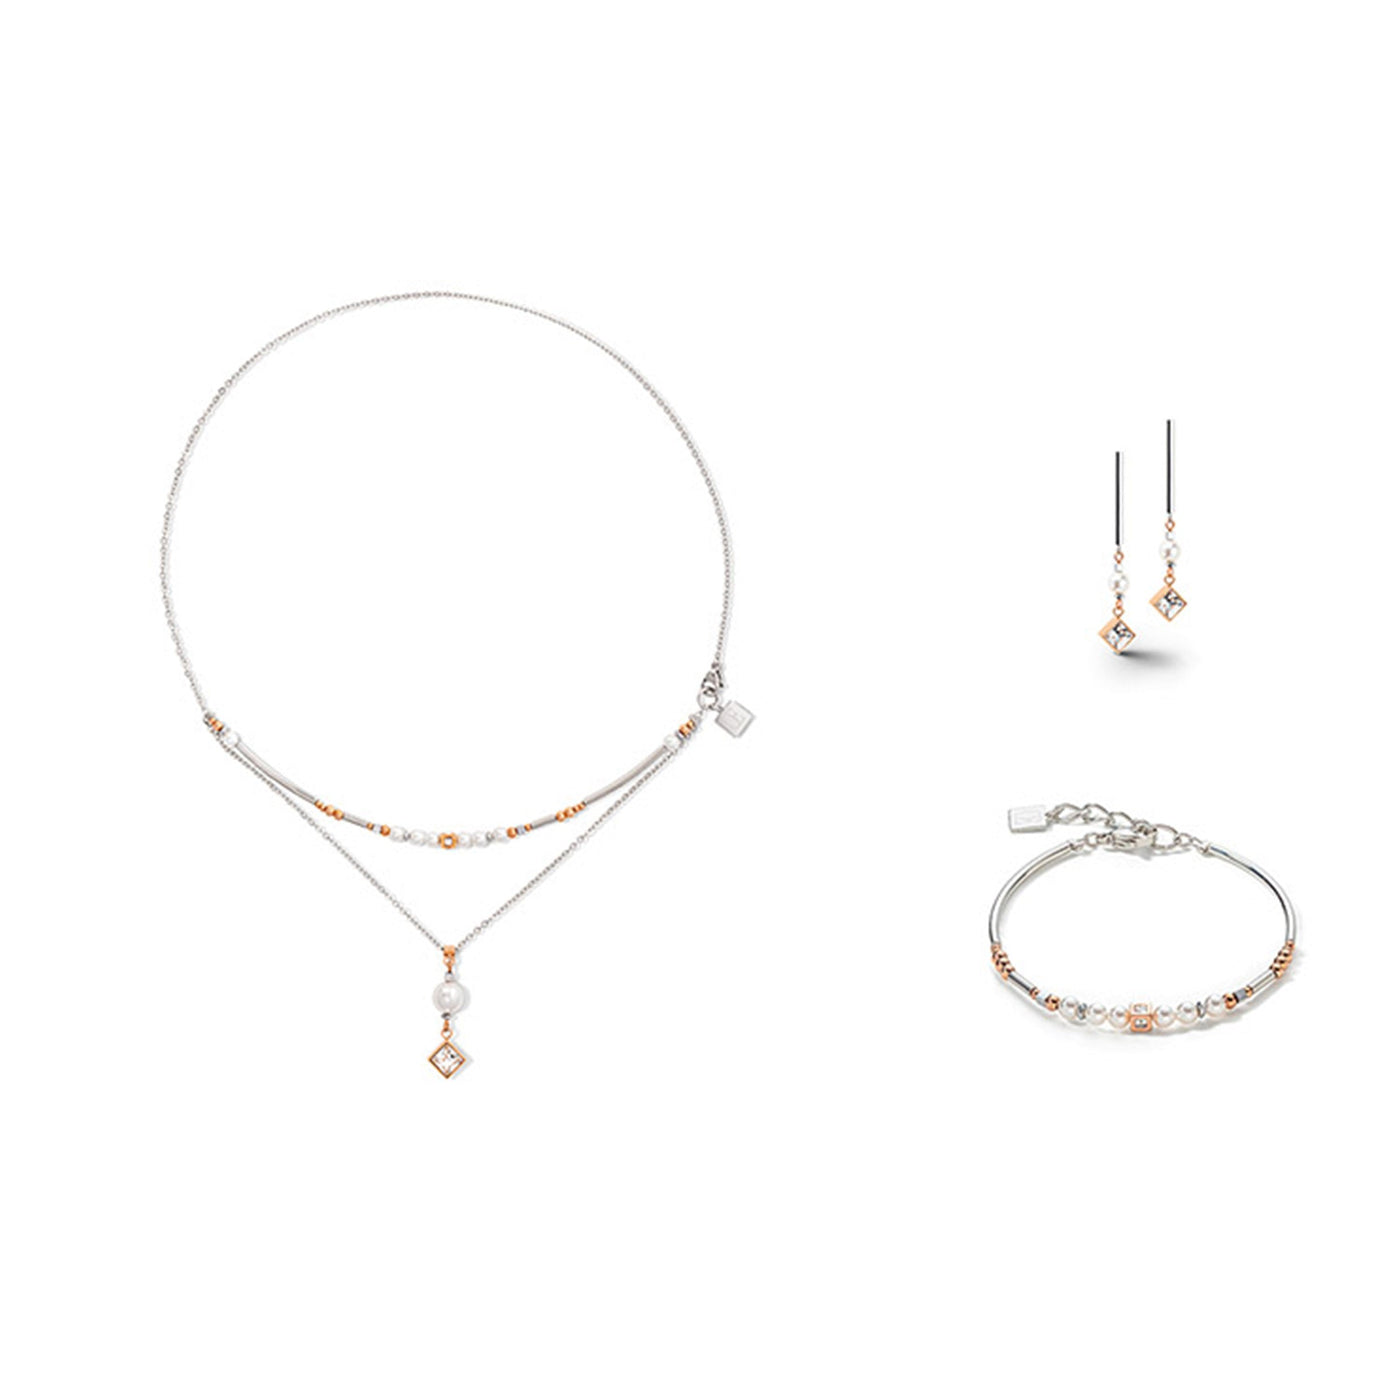 Coeur De Lion layered square crystal rose gold, white & pearl necklace